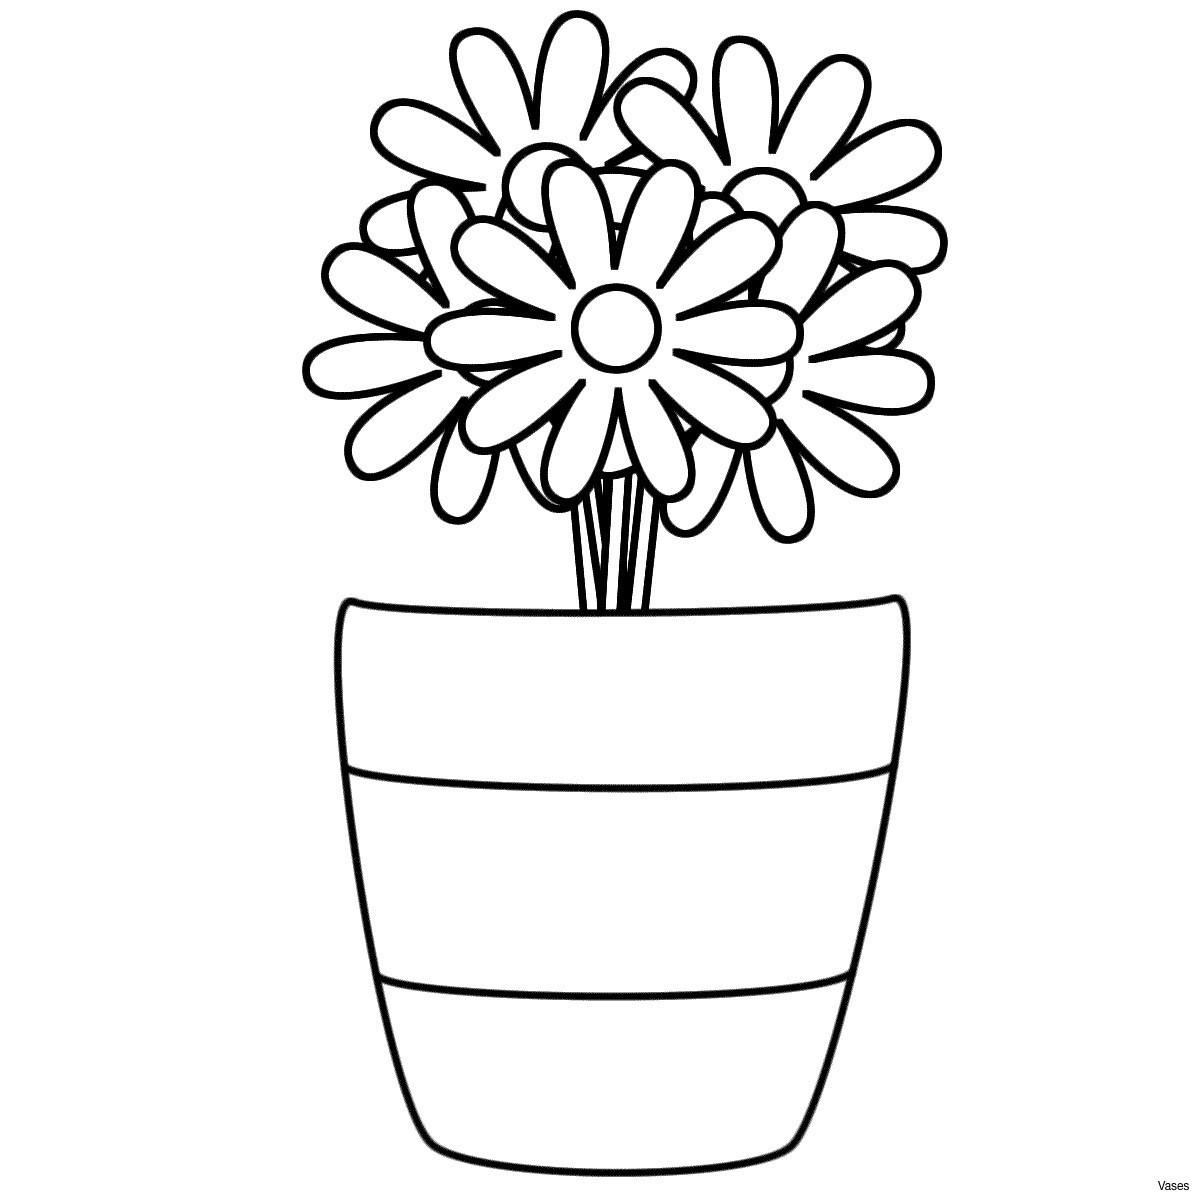 yellow rose vase of white flower cool images awesome cool vases flower vase coloring pertaining to cool vases flower vase coloring page pages flowers in a top i 0d